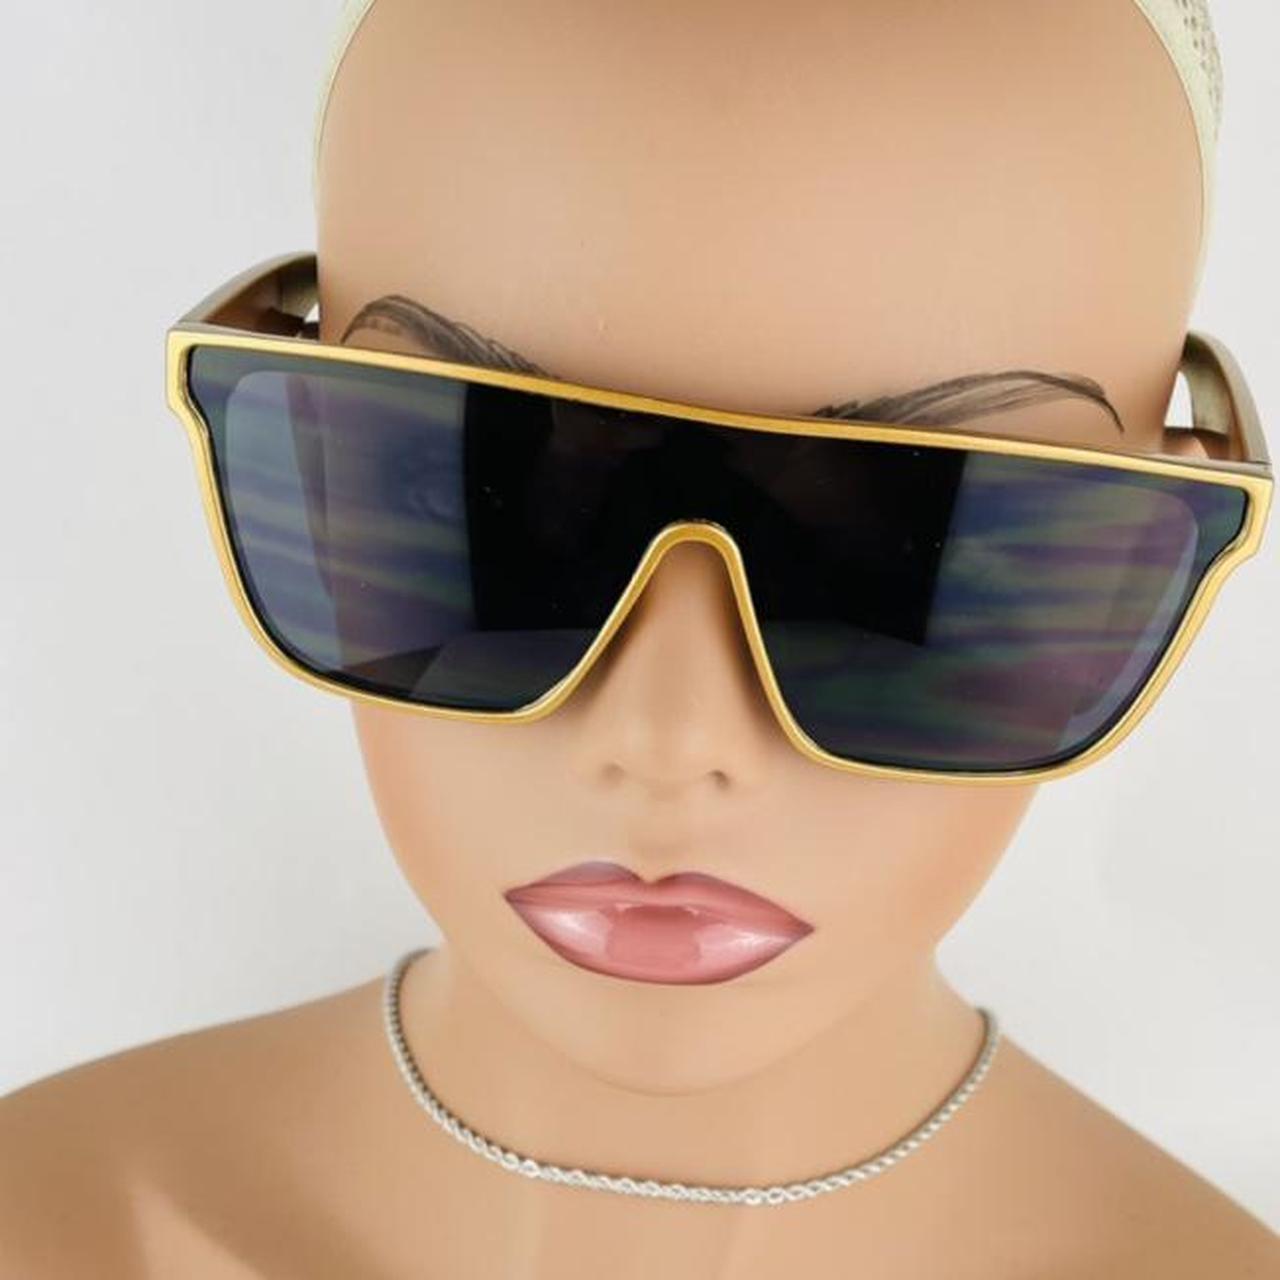 Product Image 2 - Gold frame and dark lenses#